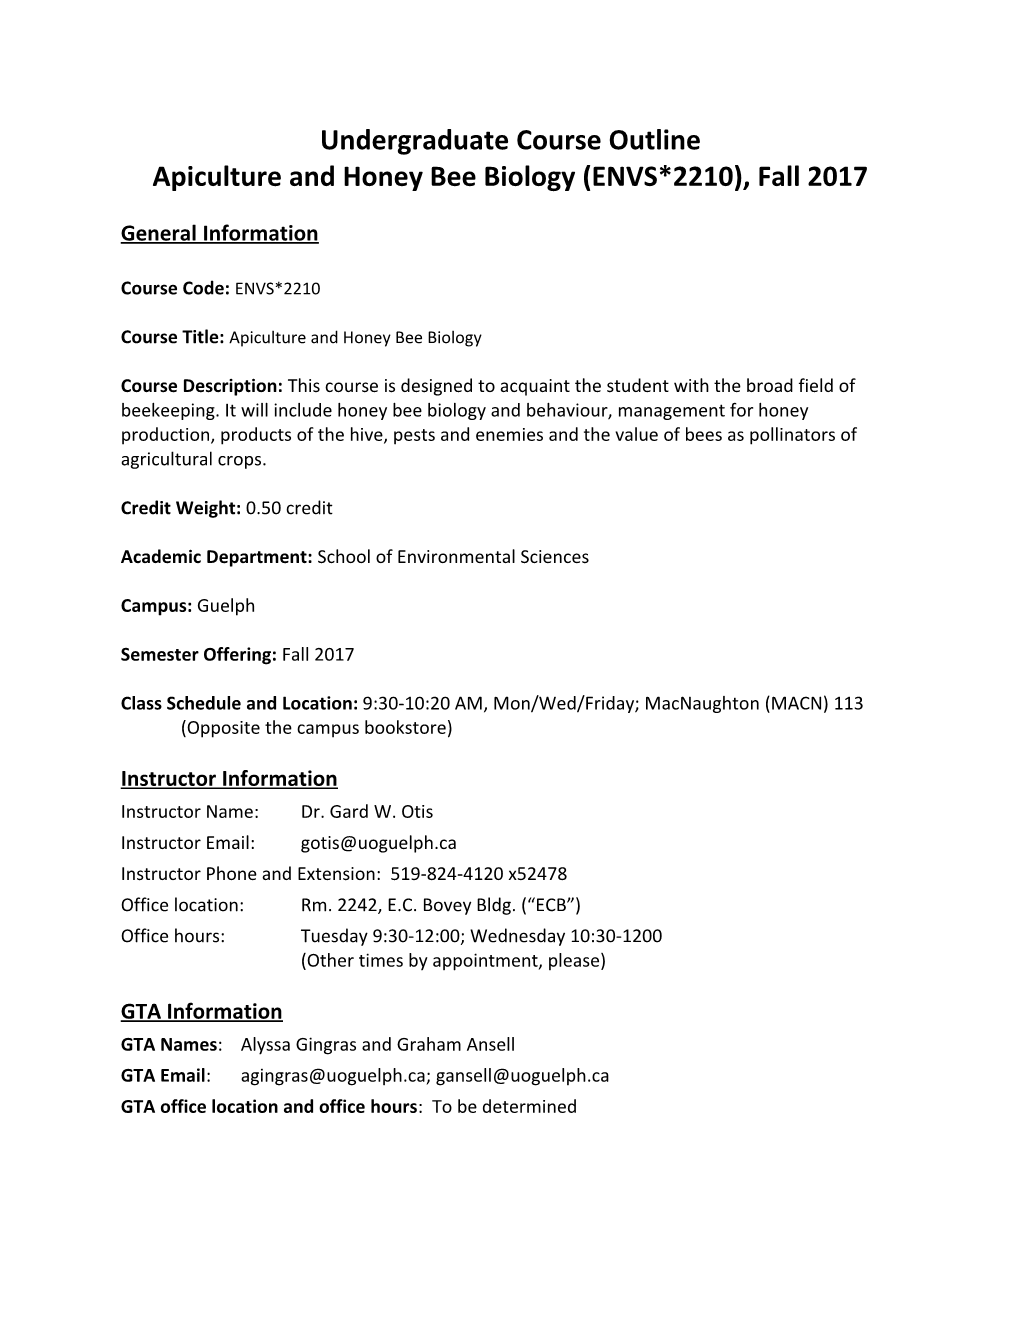 Apiculture and Honey Bee Biology (ENVS*2210), Fall 2017